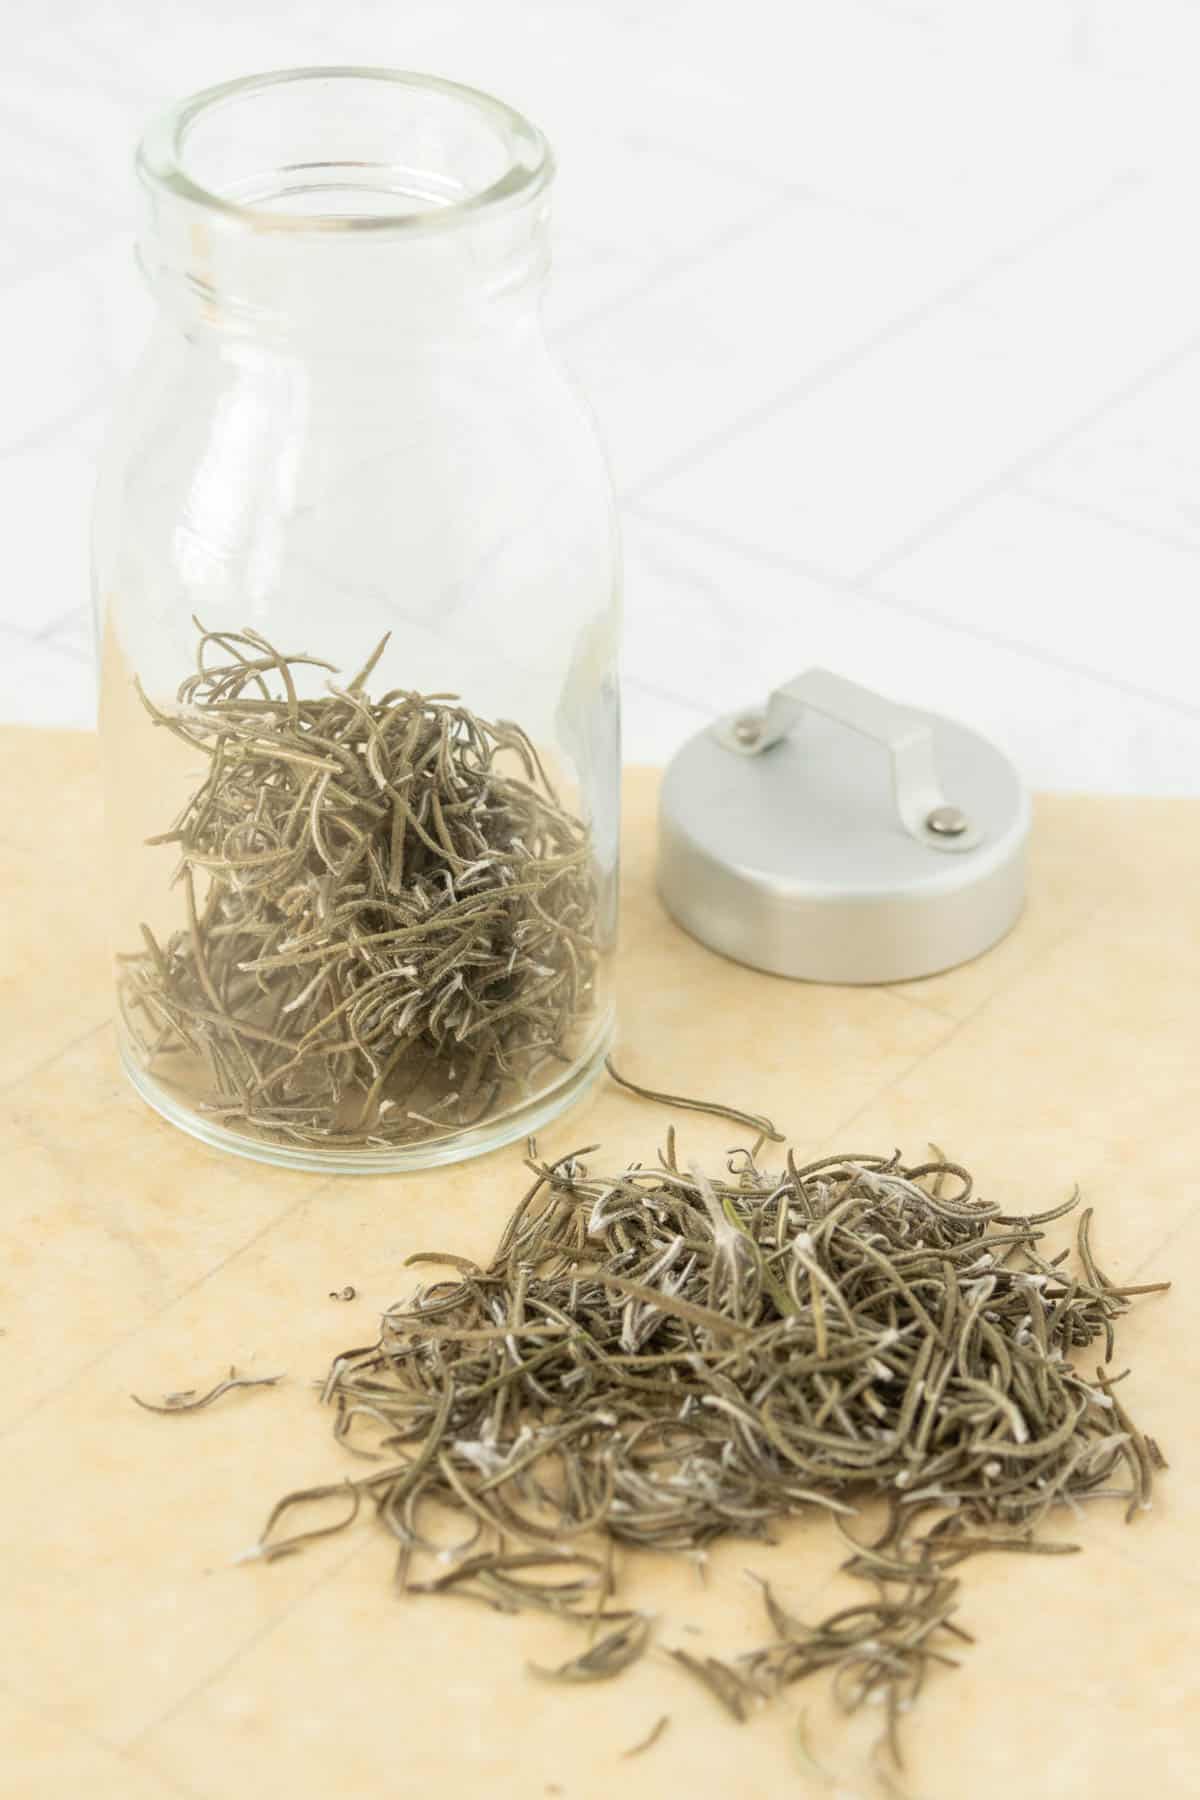 A glass jar filled with dried rosemary leaves.